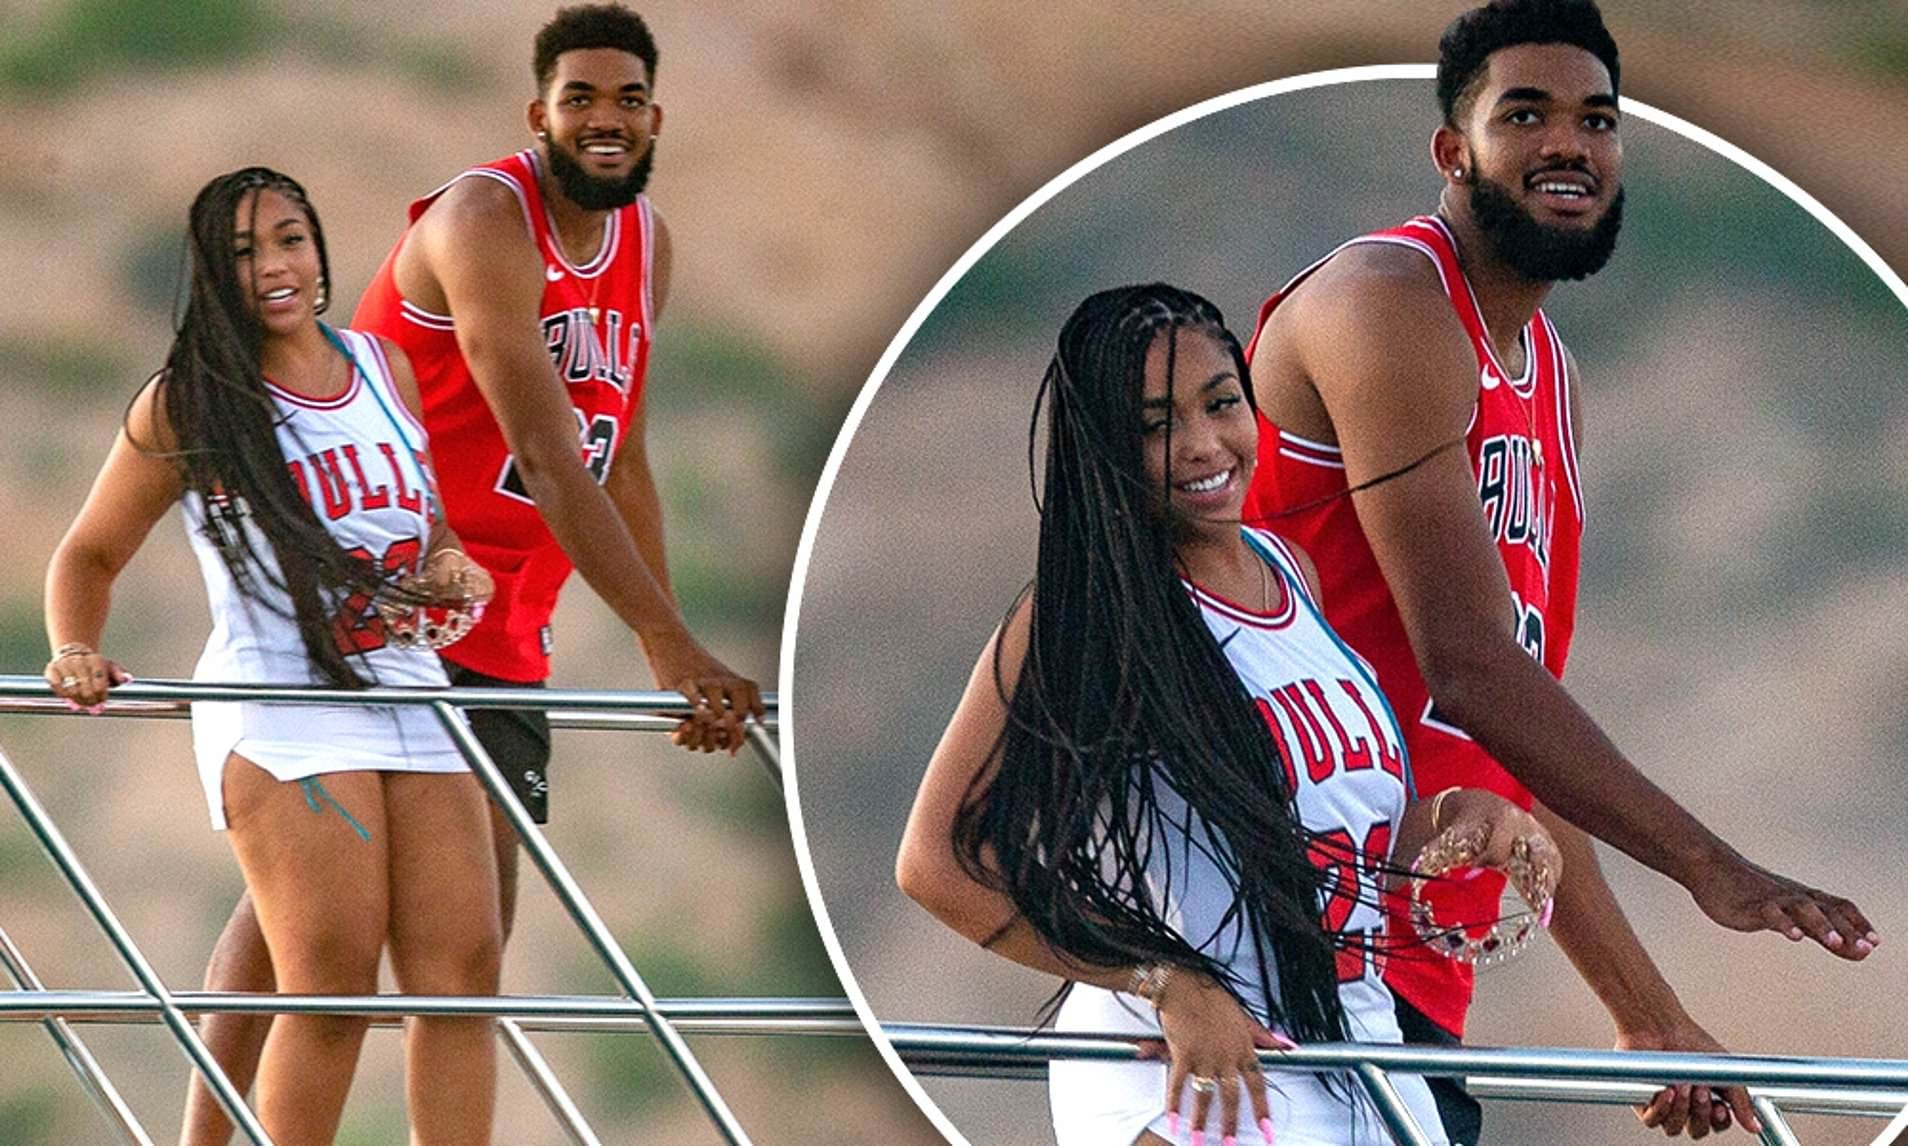 jordyn-woods-impresses-fans-with-the-gift-that-she-gave-her-bf-karl